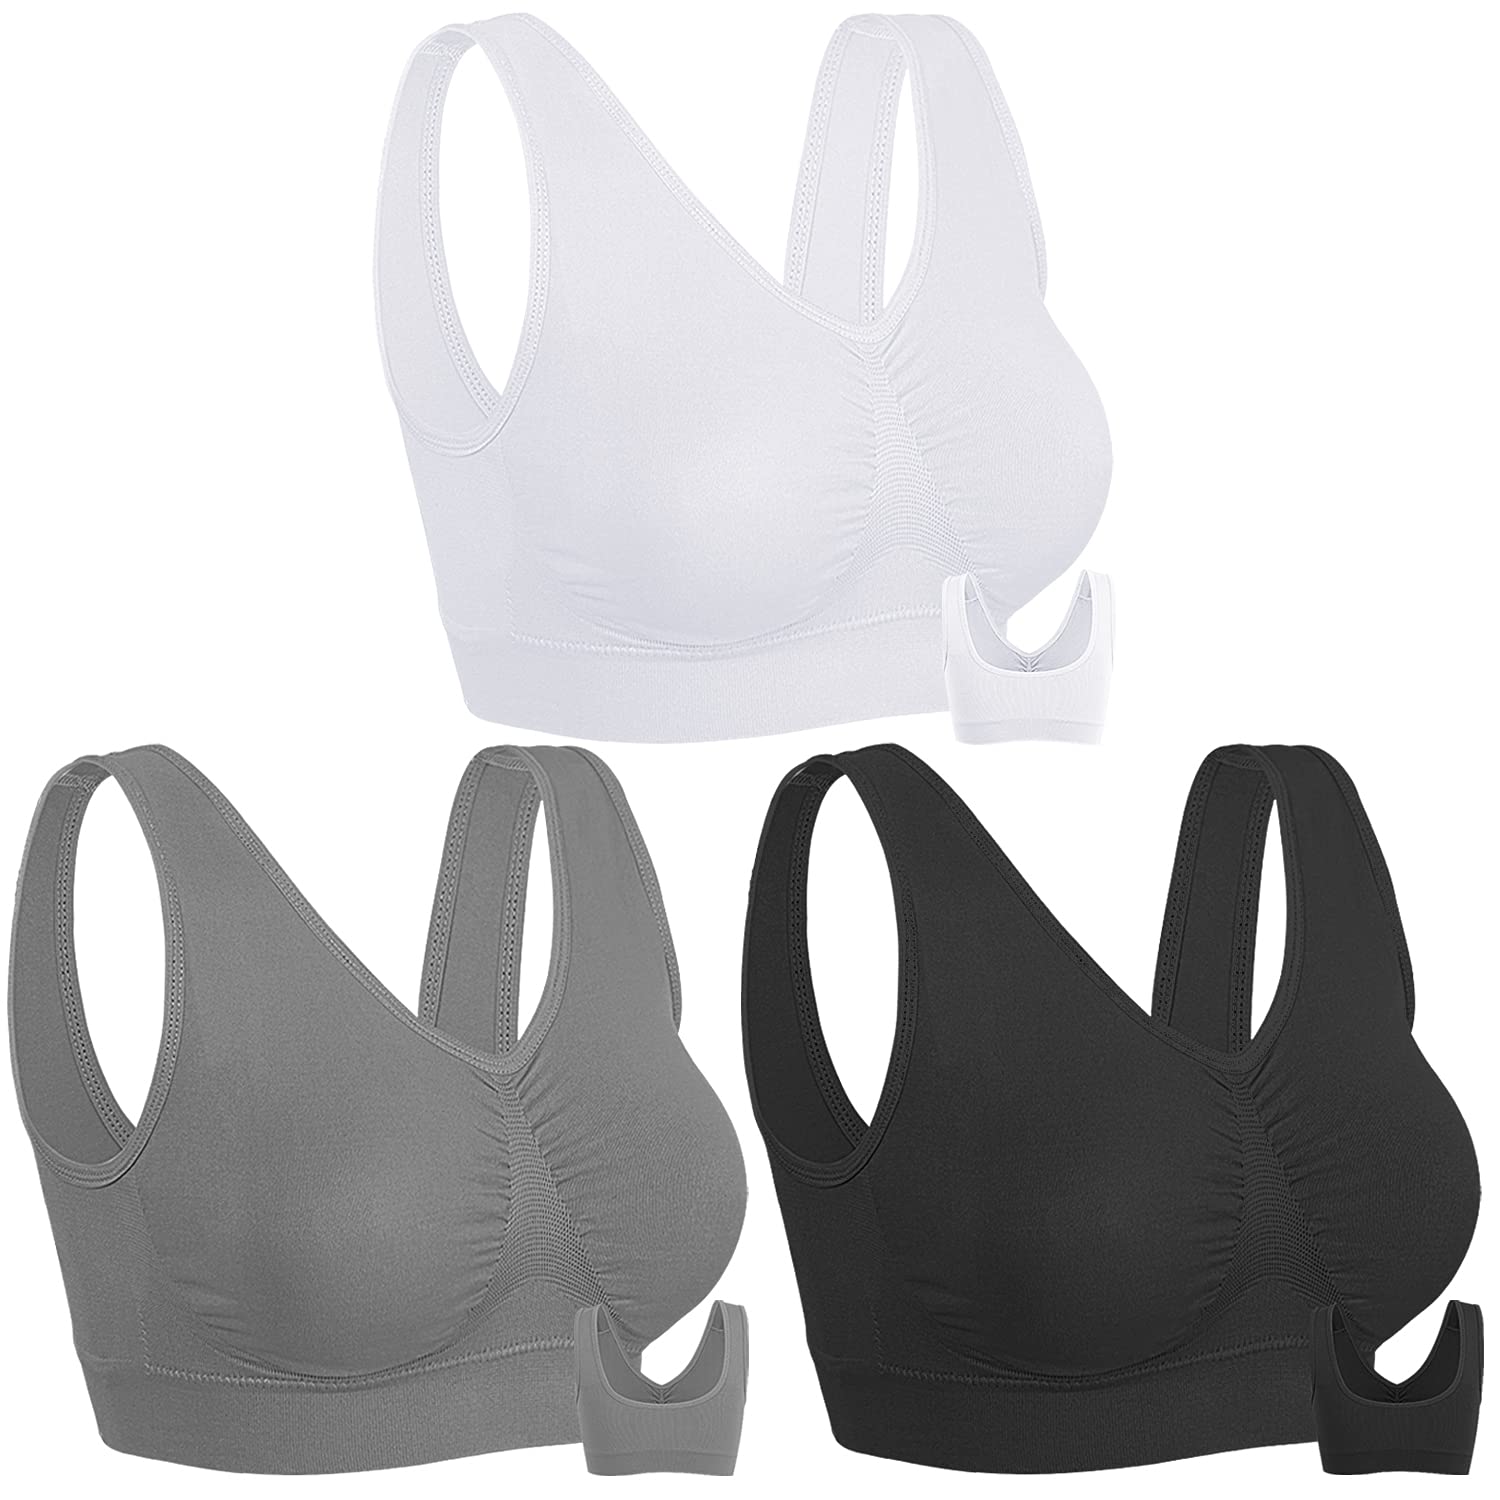 Onory 3 Pack Sports Bras for Women Wirefree Padded Workout